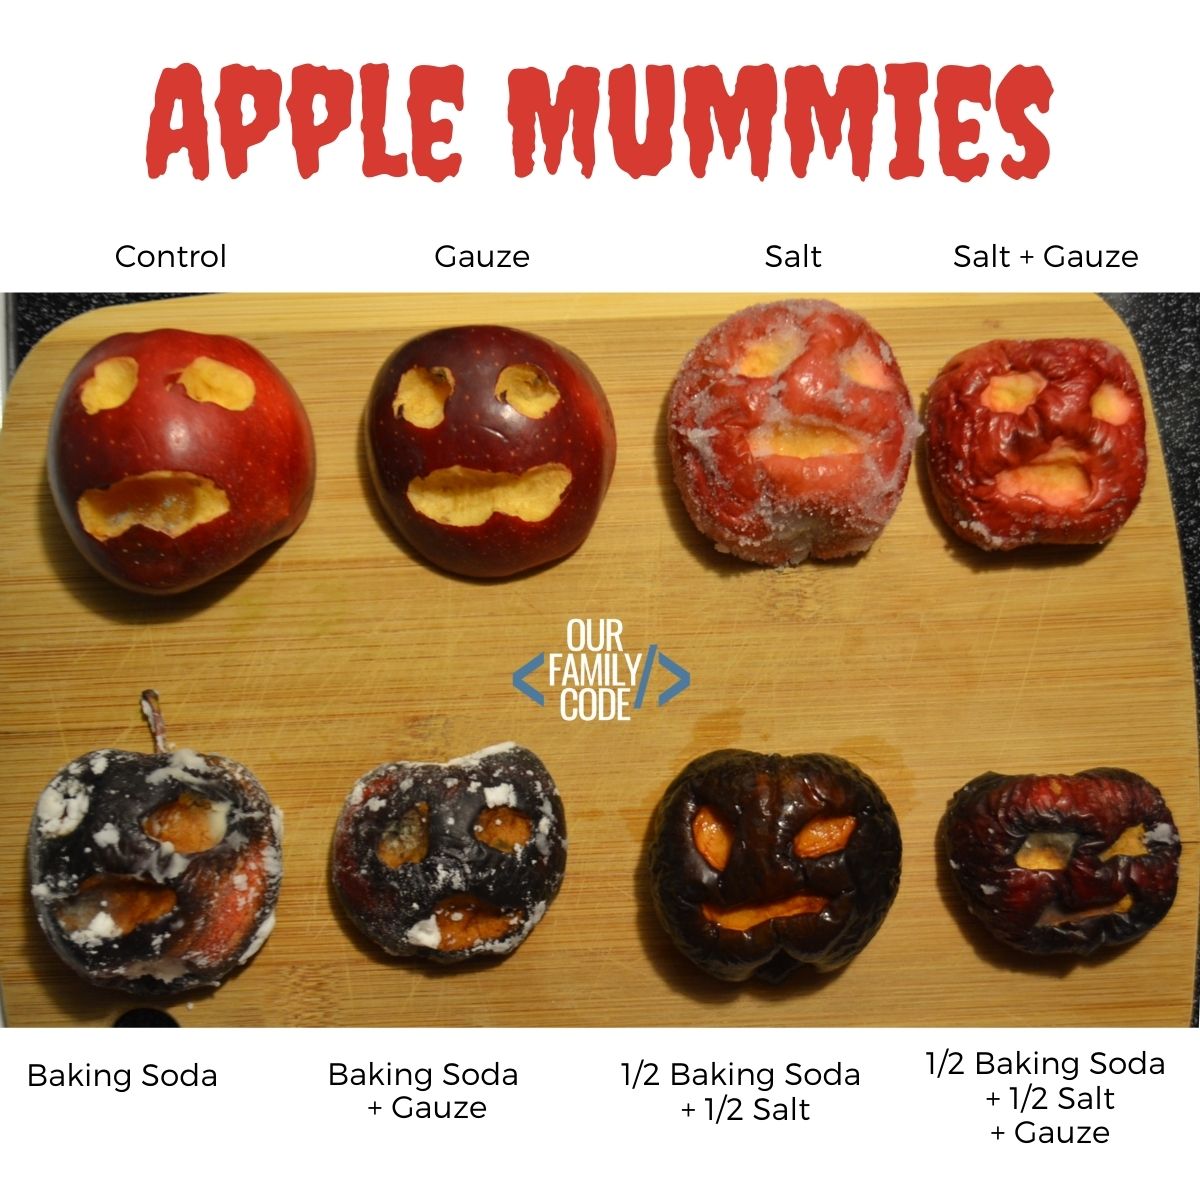 A picture of apple mummies results with 8 shriveled apple mummies.